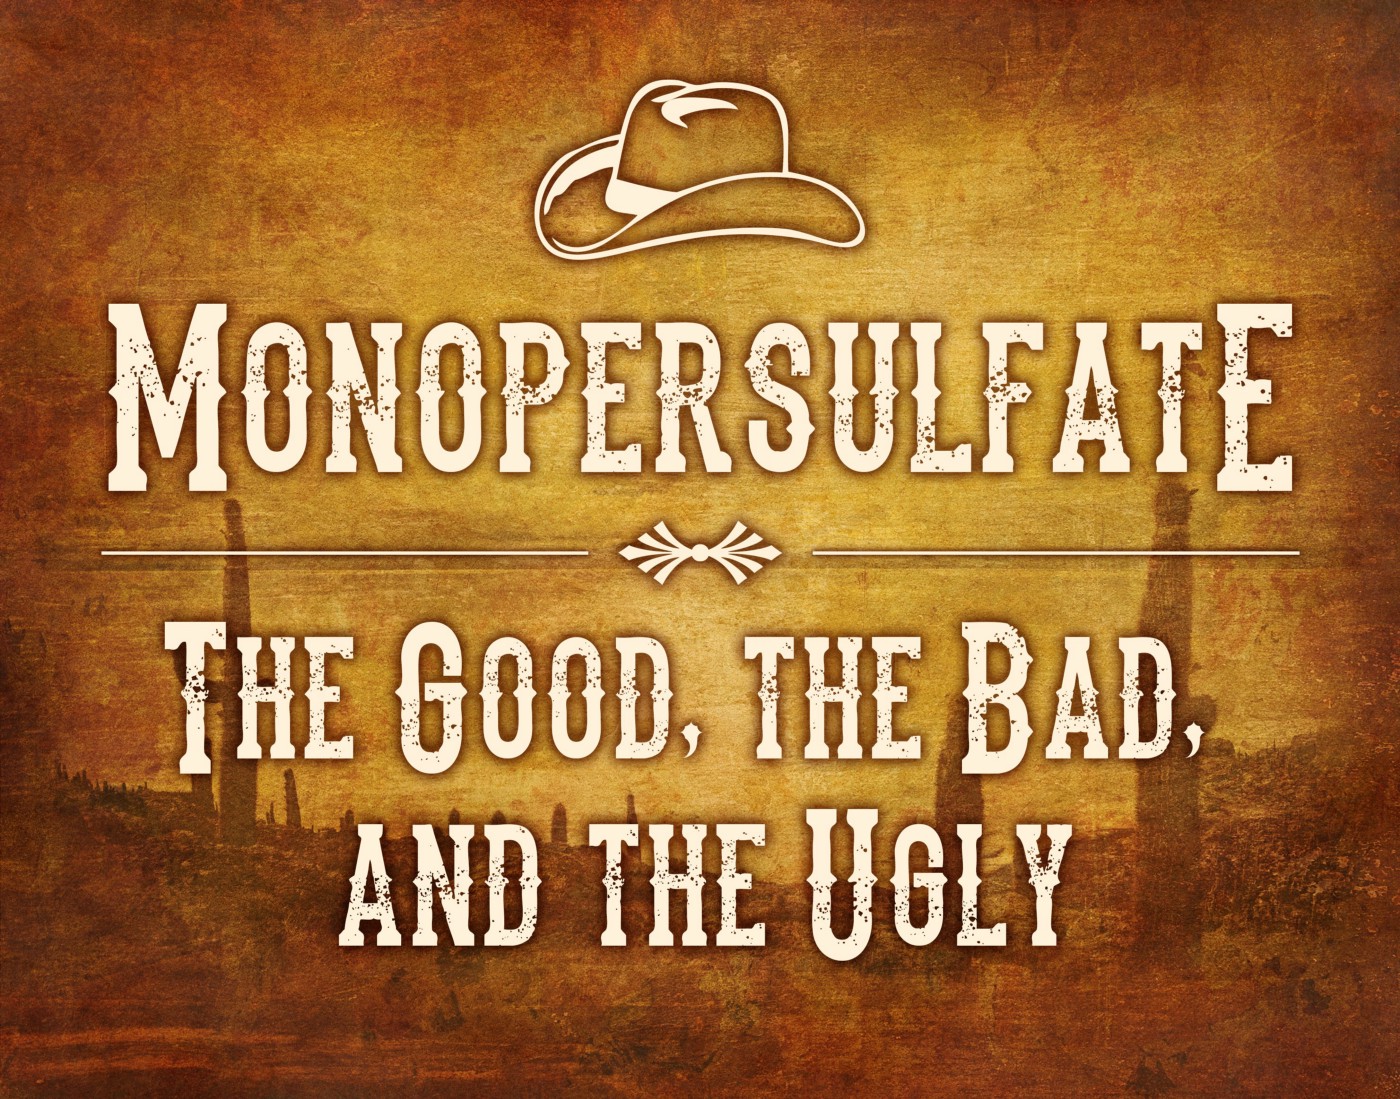 Monopersulfate — the Good, the Bad, and the Ugly